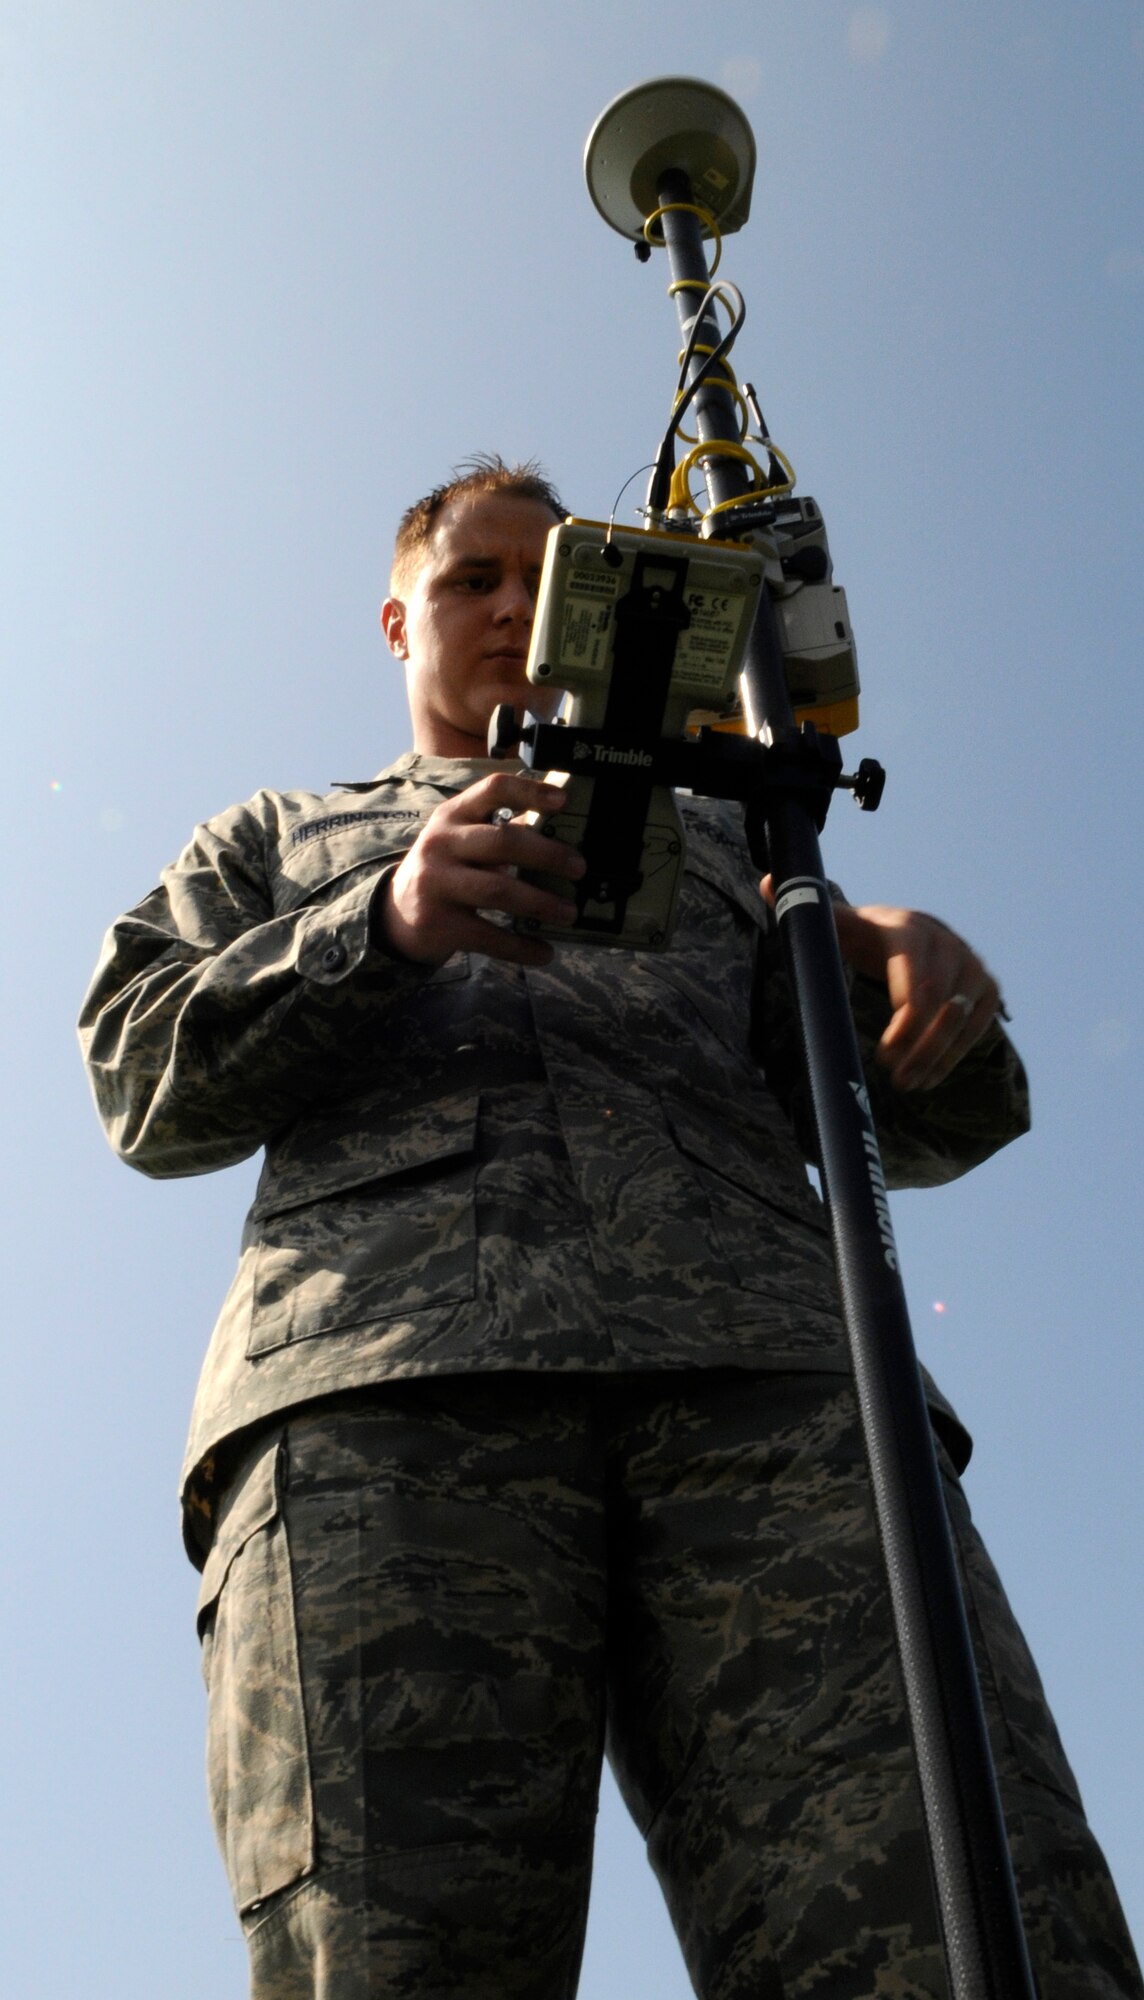 Staff Sgt. Daniel Herrington, 100th Civil Engineer Squadron Geo-Base Technician, reads data on his specialized equipment for a ground survey conducted at RAF Mildenhall, April 21.  Geo-Base provides raw-data, maps, charts and grids for civil engineering projects across the base.  (U.S. Air Force photo by Senior Airman Christopher L. Ingersoll)